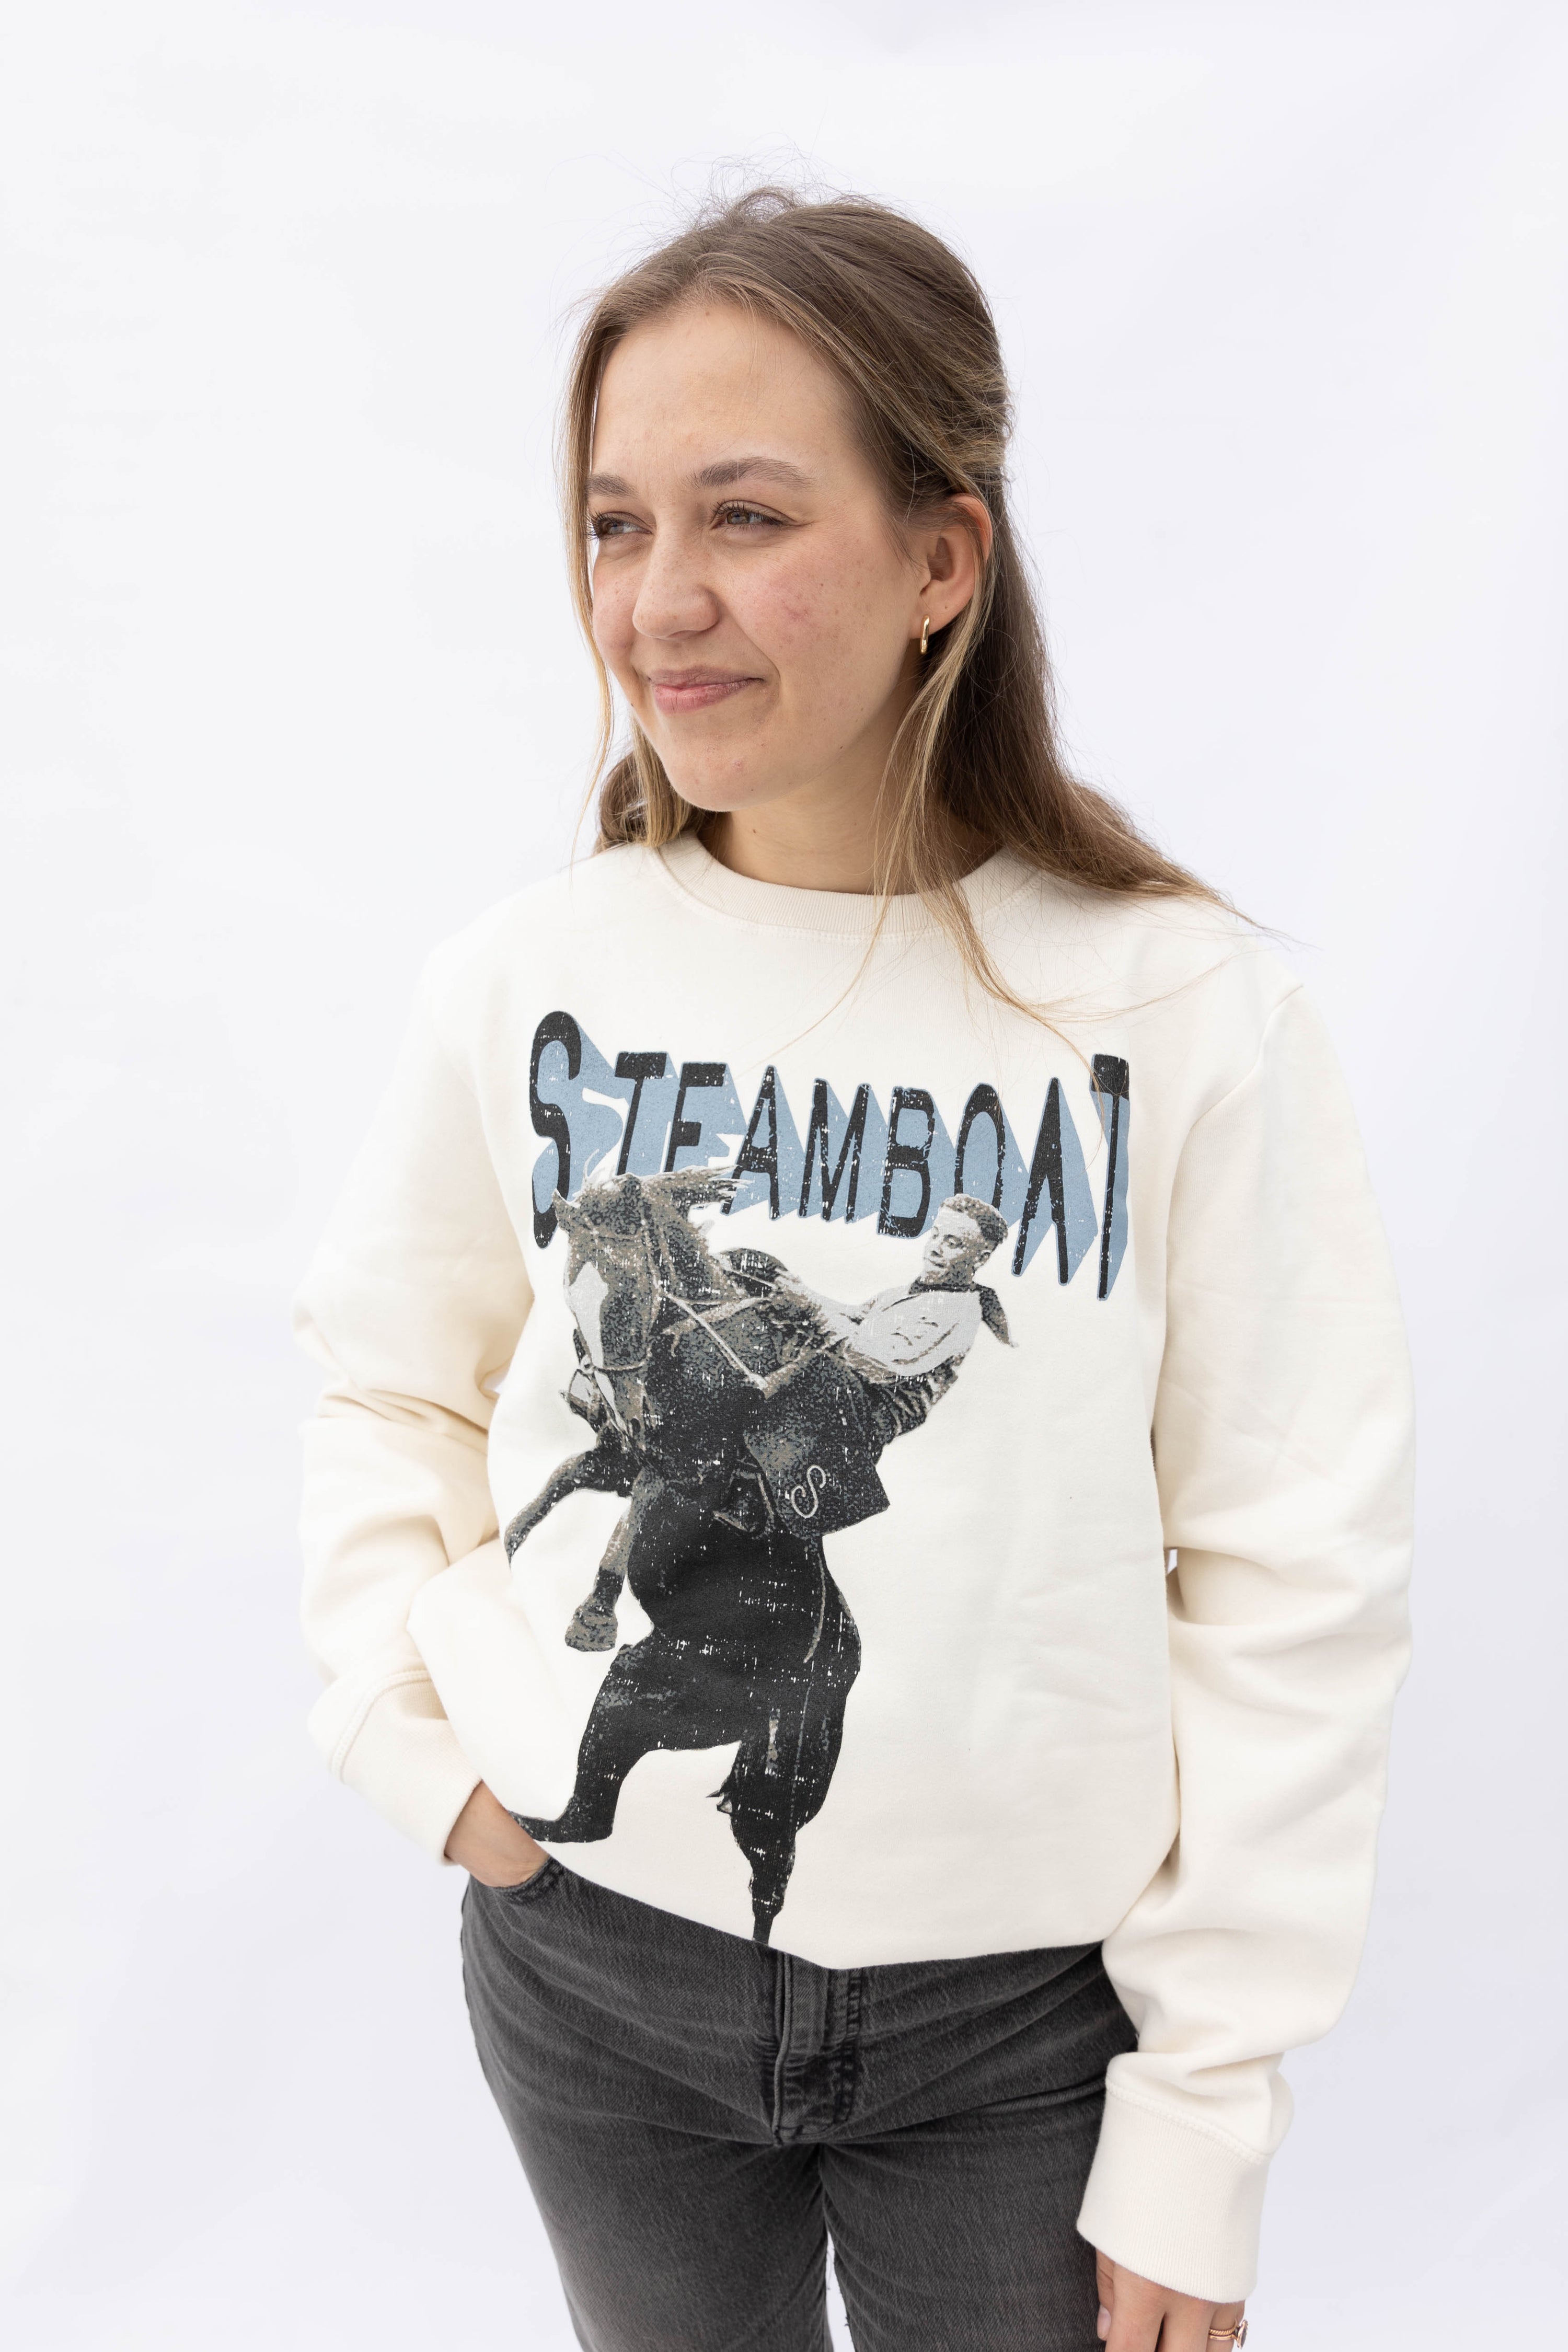 Steamboat Rodeo Crewneck